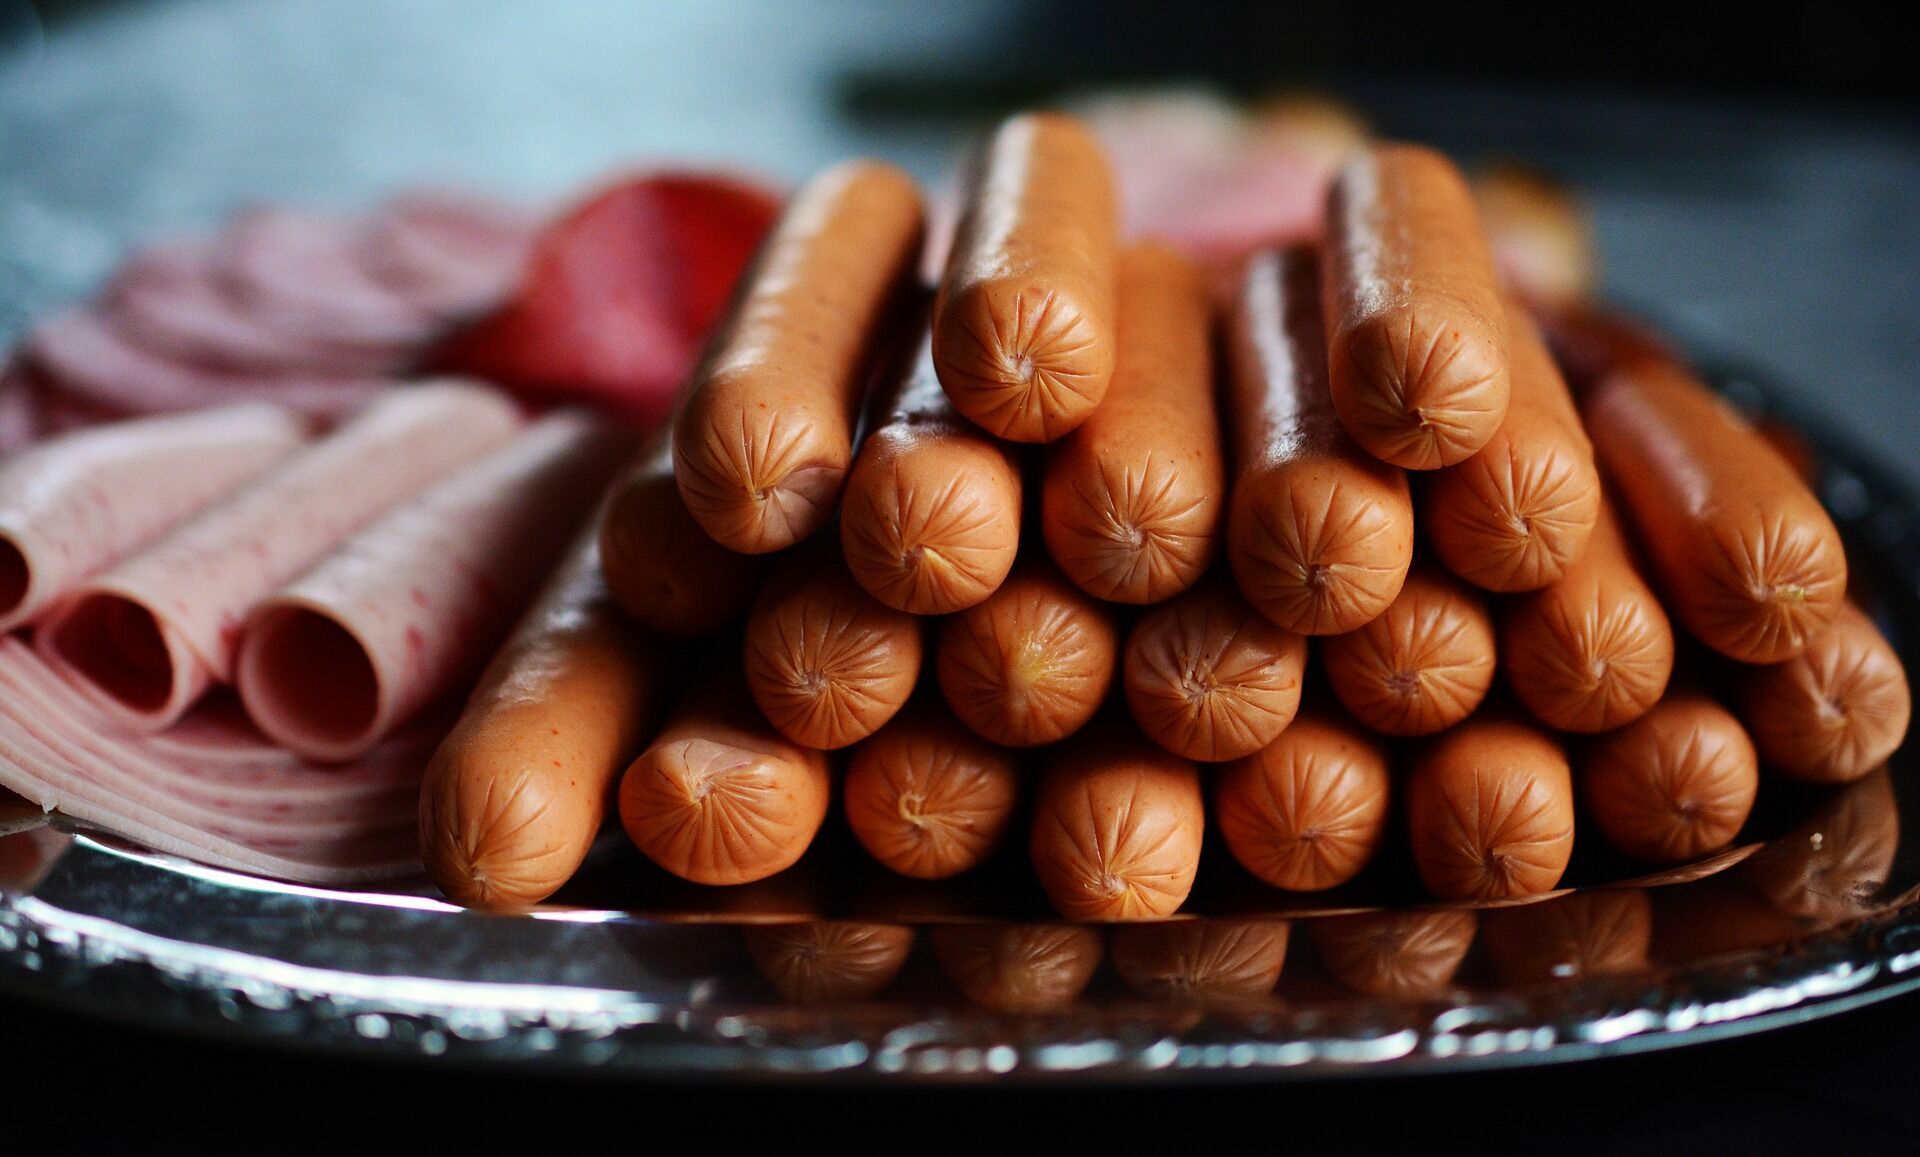 It is better to give up sausages and sausage altogether